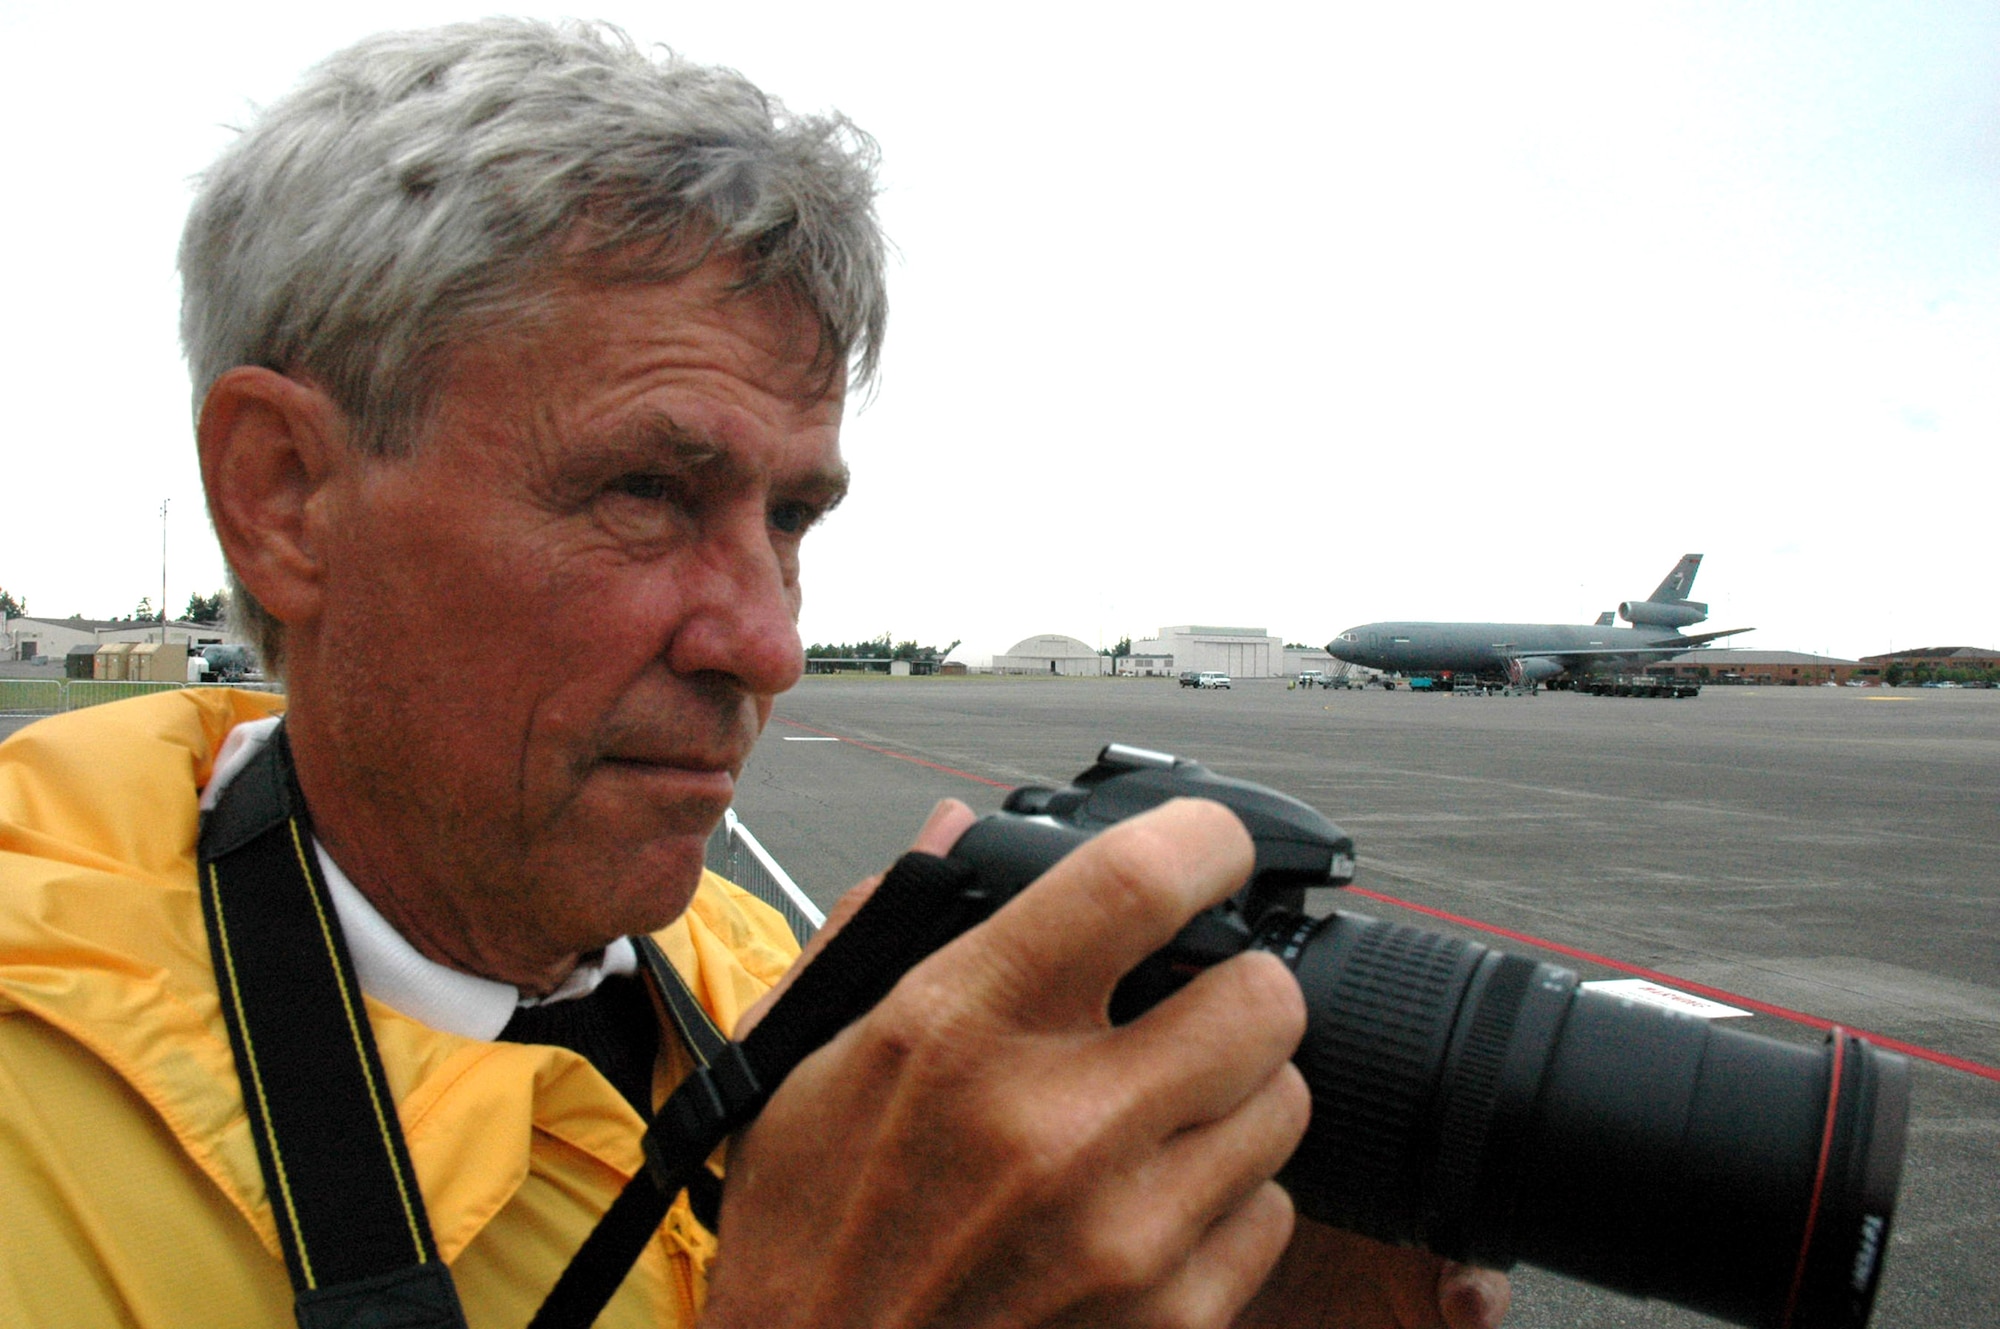 James Consor takes a photo of a KC-10 Extender from McGuire Air Force Base, N.J., during operations July 23 for Air Mobility Command's Rodeo 2007 at McChord AFB, Wash. Mr. Consor is an artist from New York City, and a member of the Air Force Art Program. He has been an artist for more than 39 years and works in oils. He is one of four artists in the Air Force Art Program to visit Rodeo 2007 for future art works for the Air Force. (U.S. Air Force photo/Tech. Sgt. Scott T. Sturkol) 
